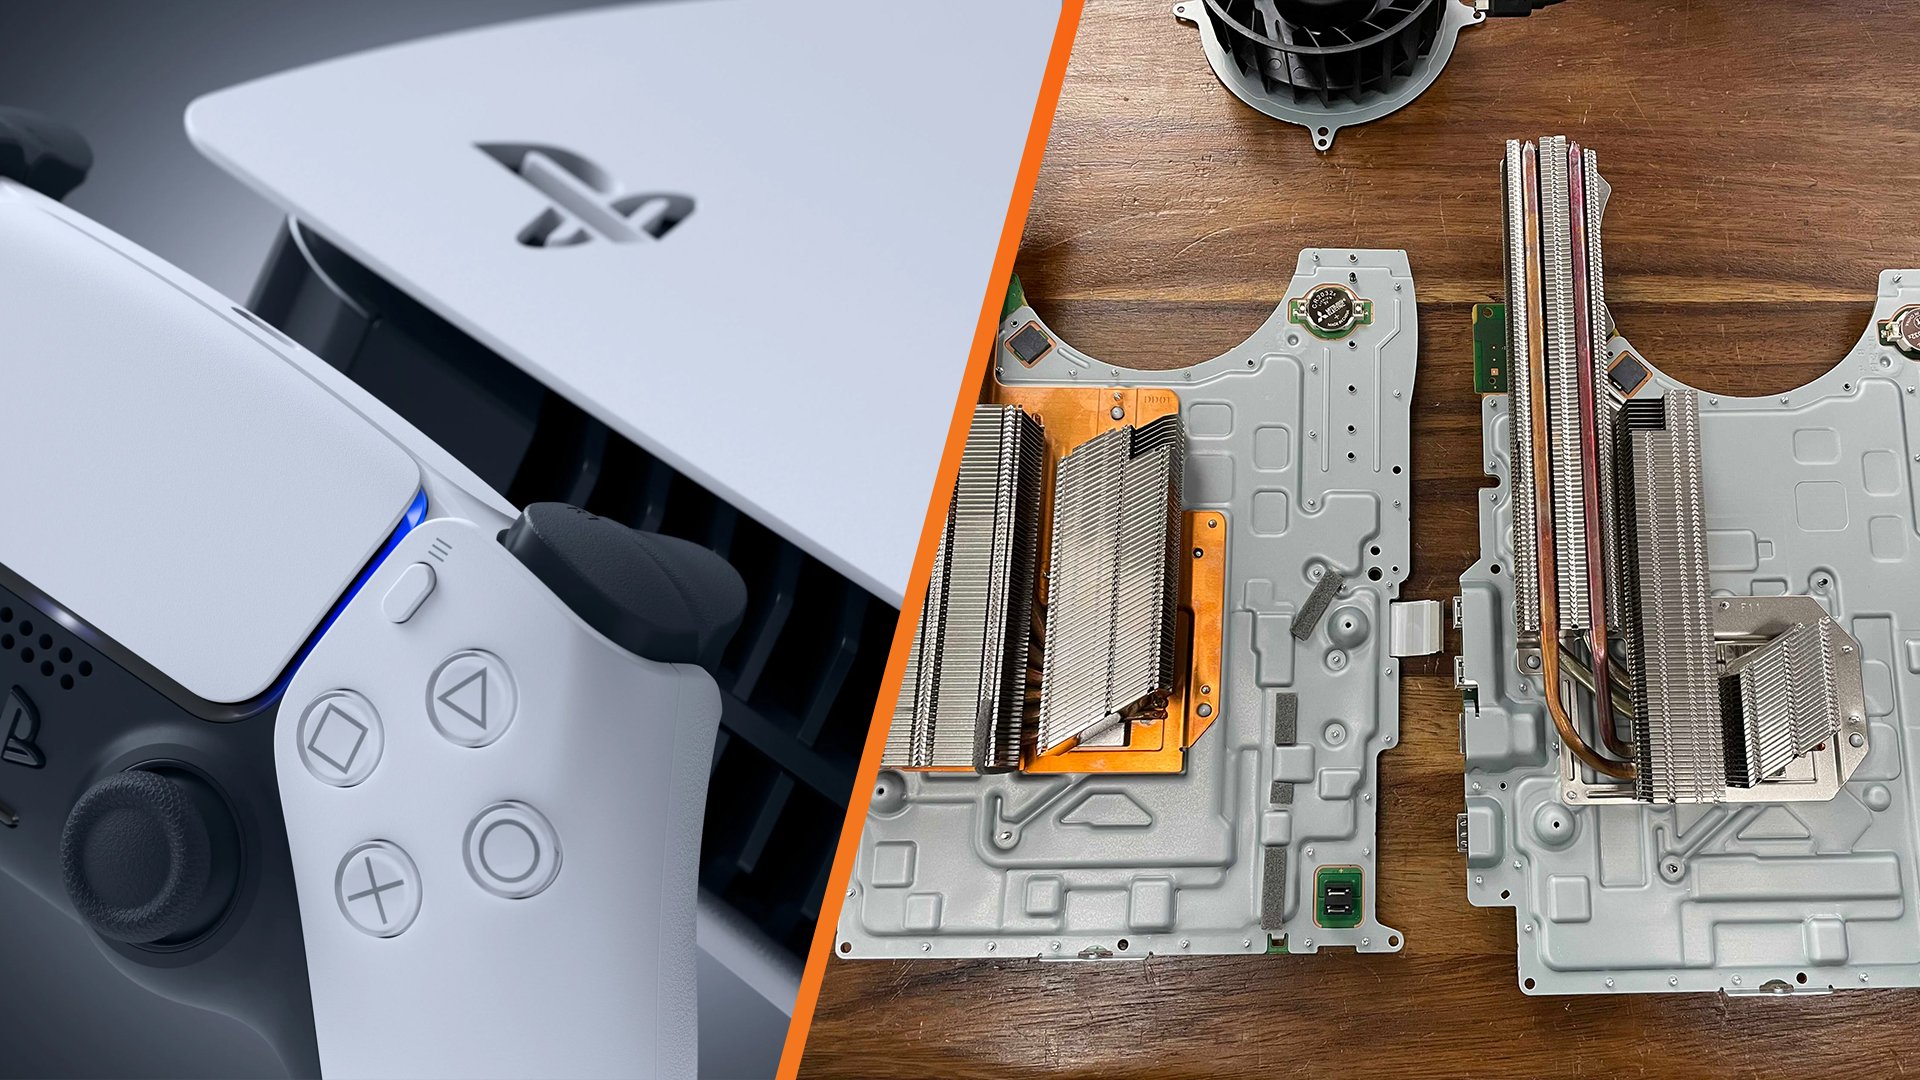 PS5 Tiny: Fan goes viral for making Sony console even slimmer